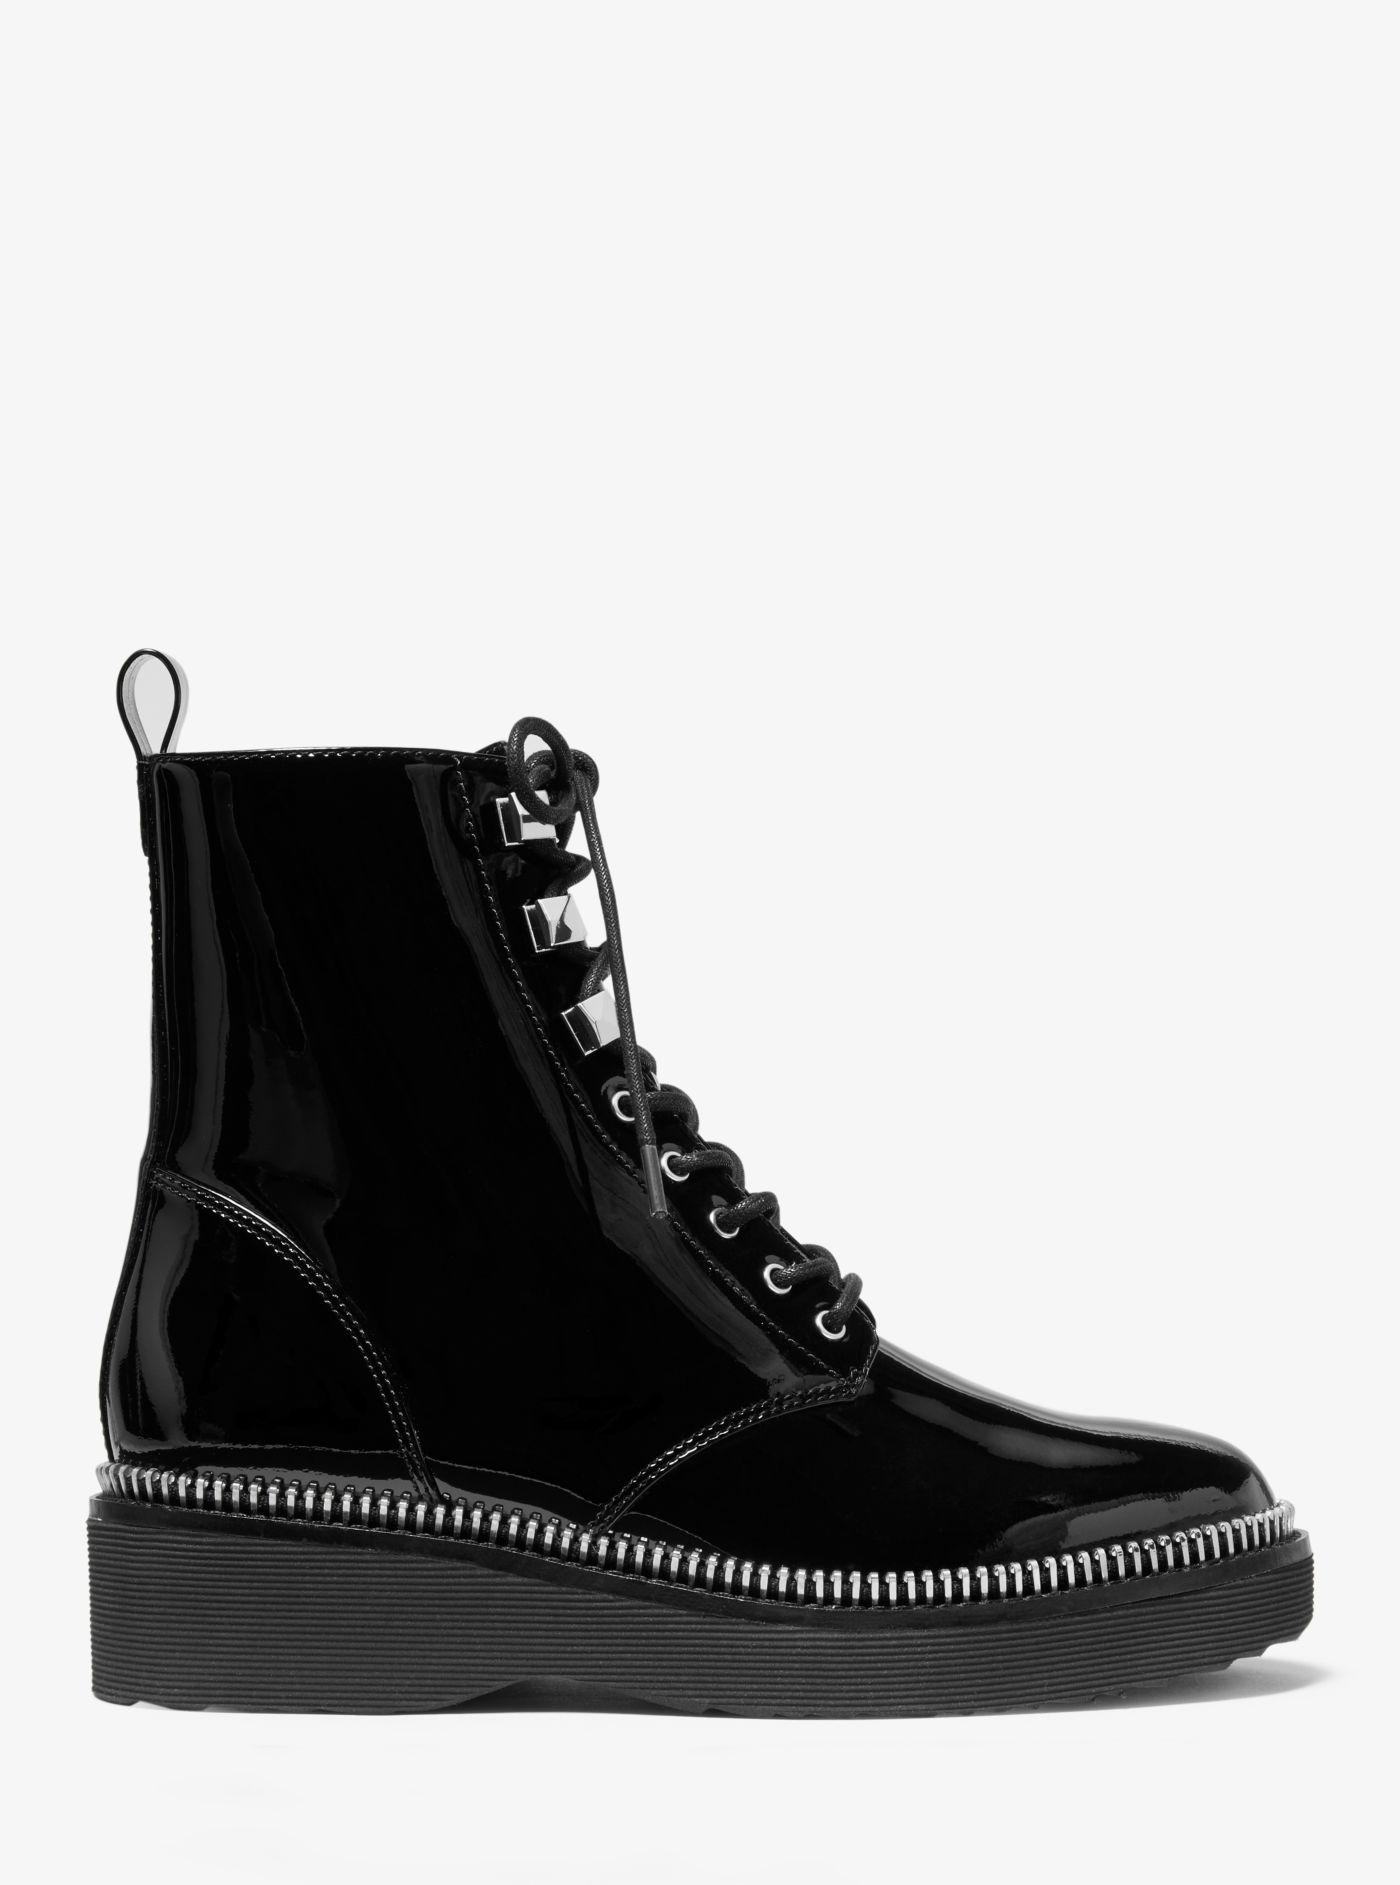 michael kors patent leather boots